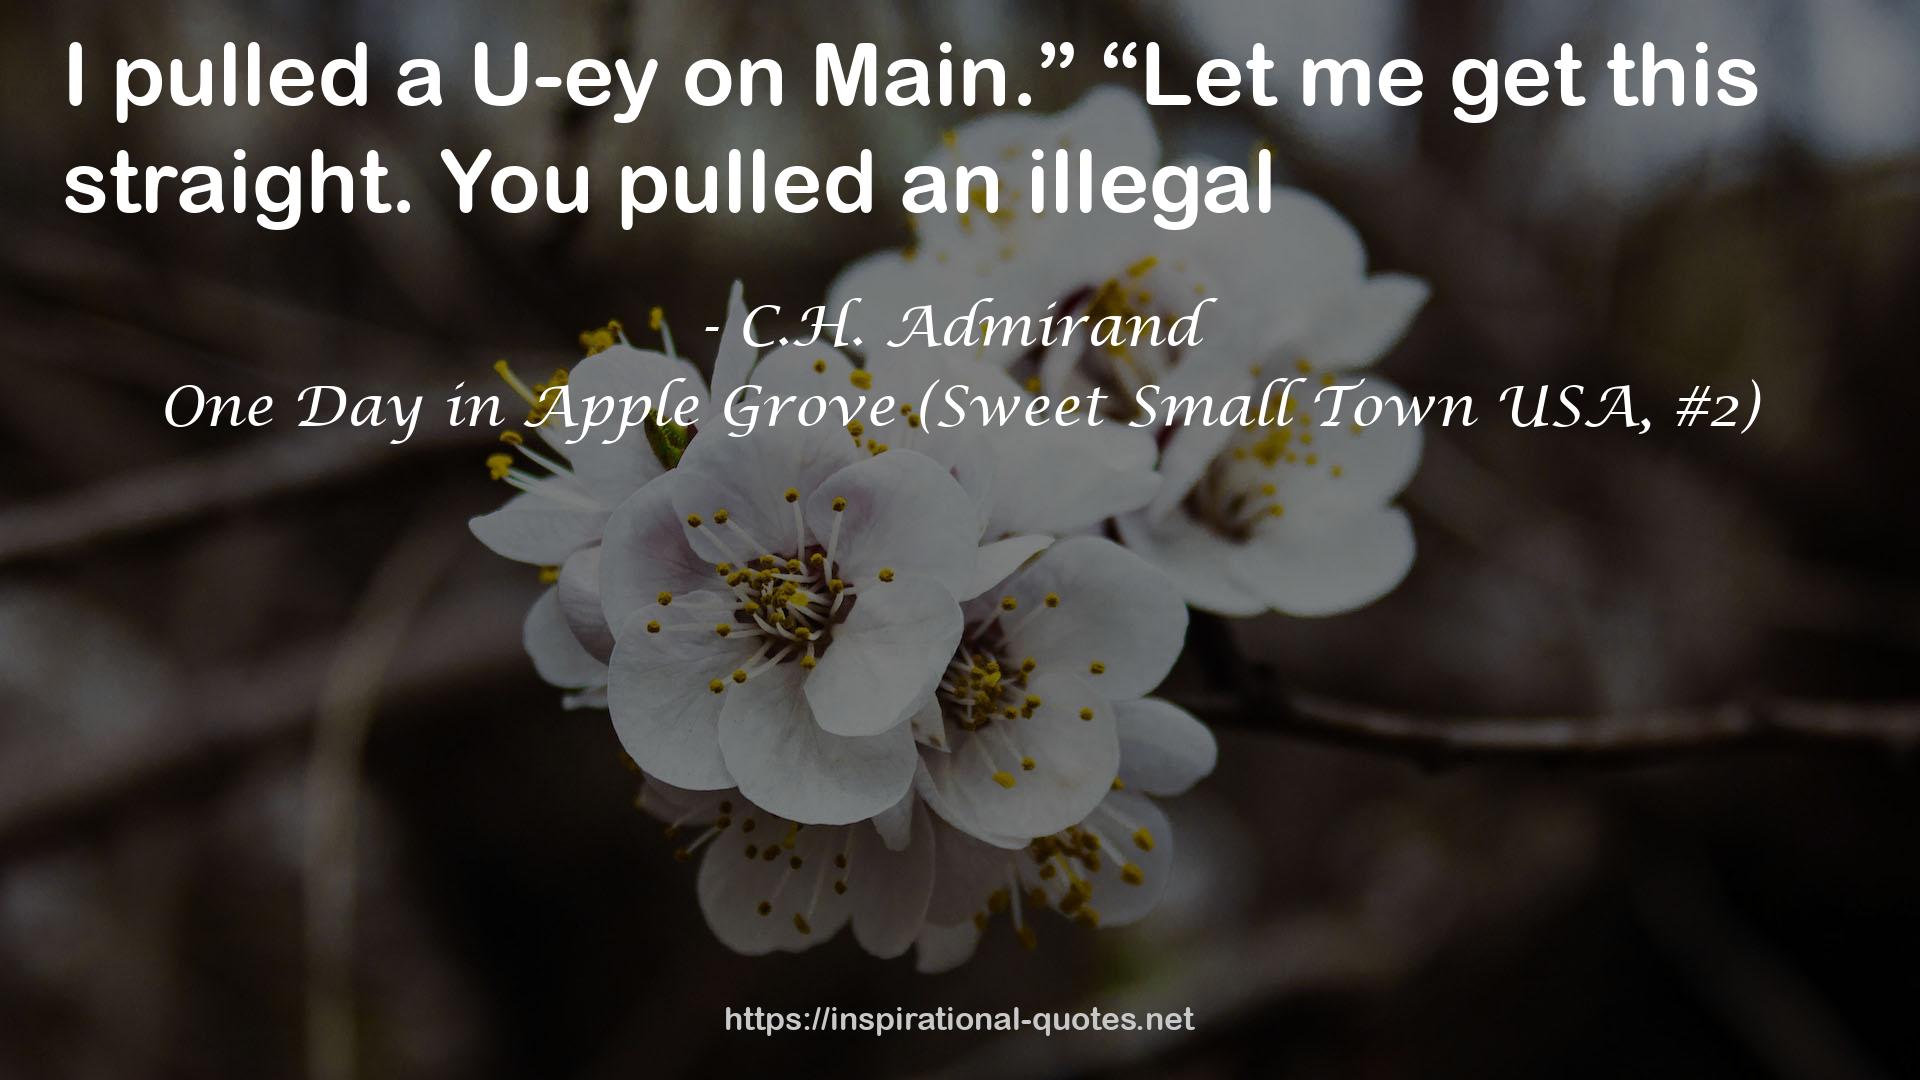 One Day in Apple Grove (Sweet Small Town USA, #2) QUOTES